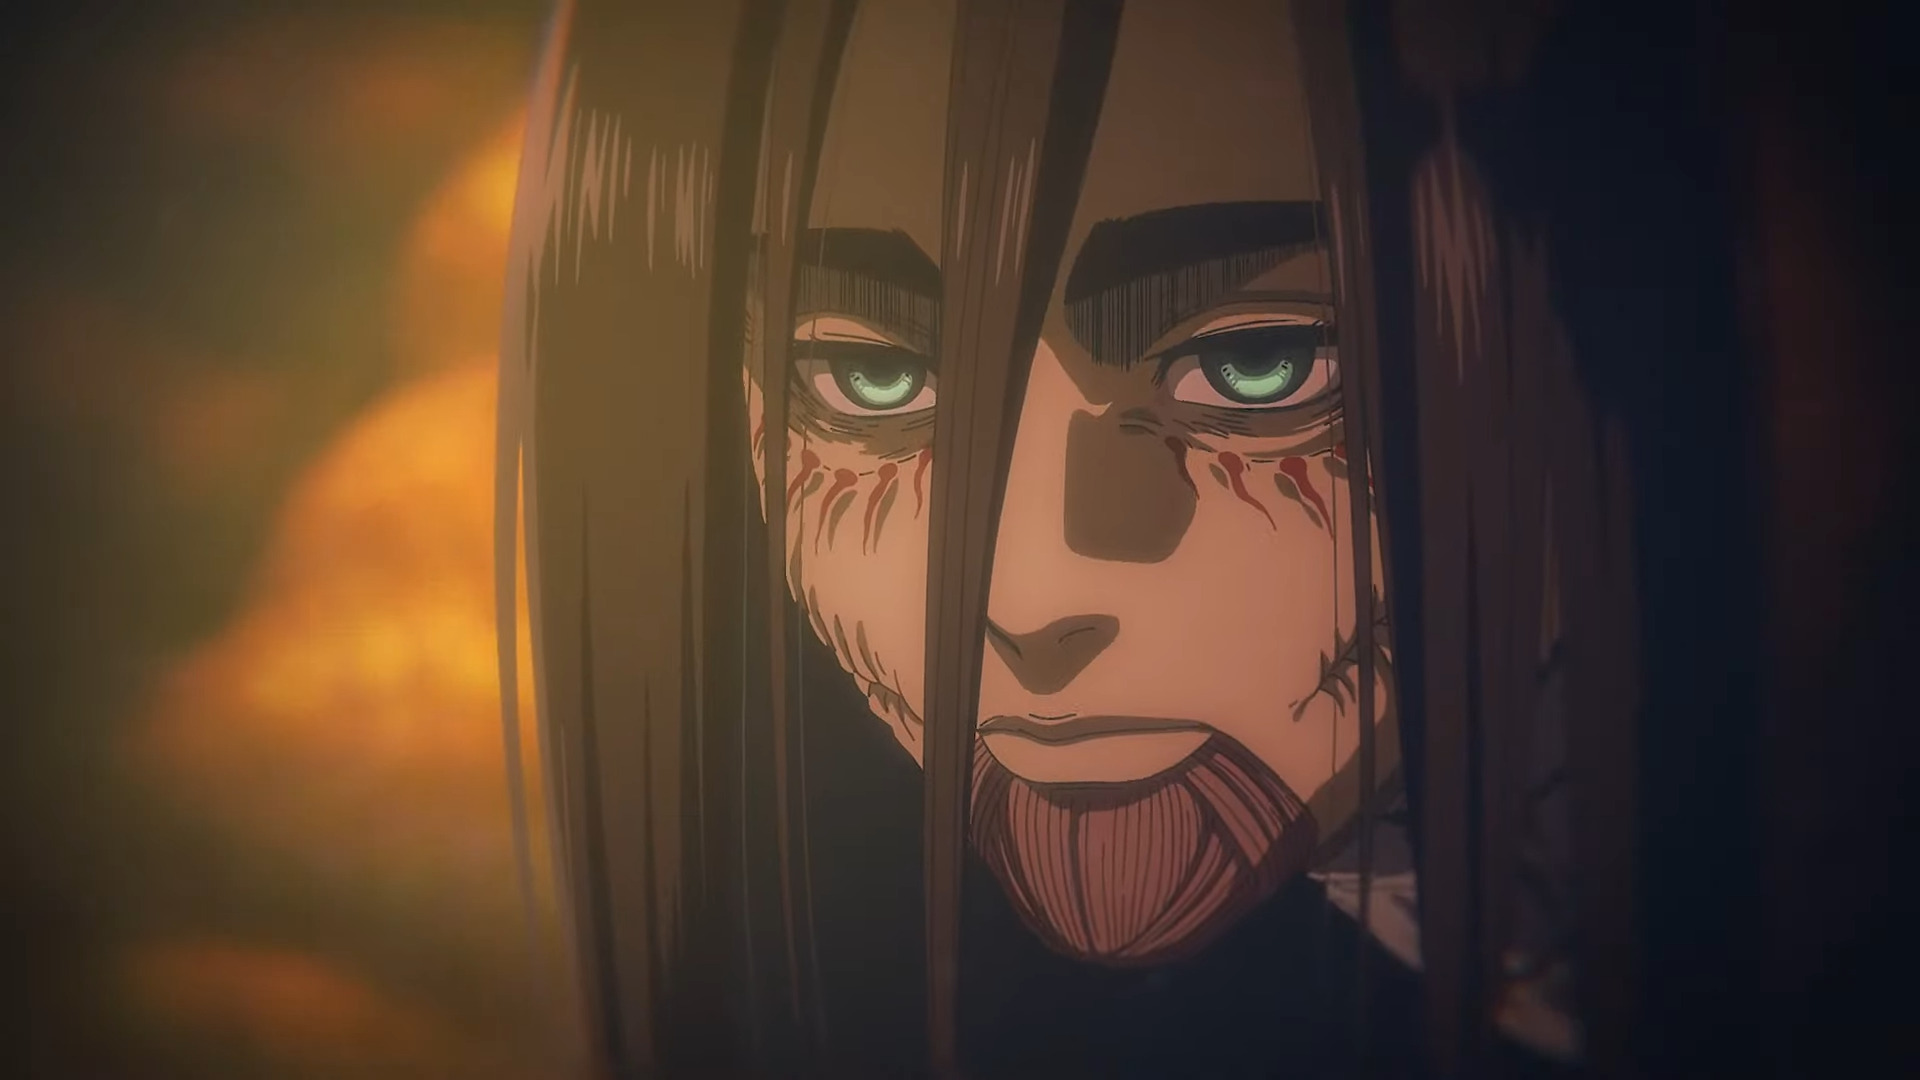 Attack on Titan reveals the final trailer, and Linked Horizon and Ai Higuchi return with theme songs